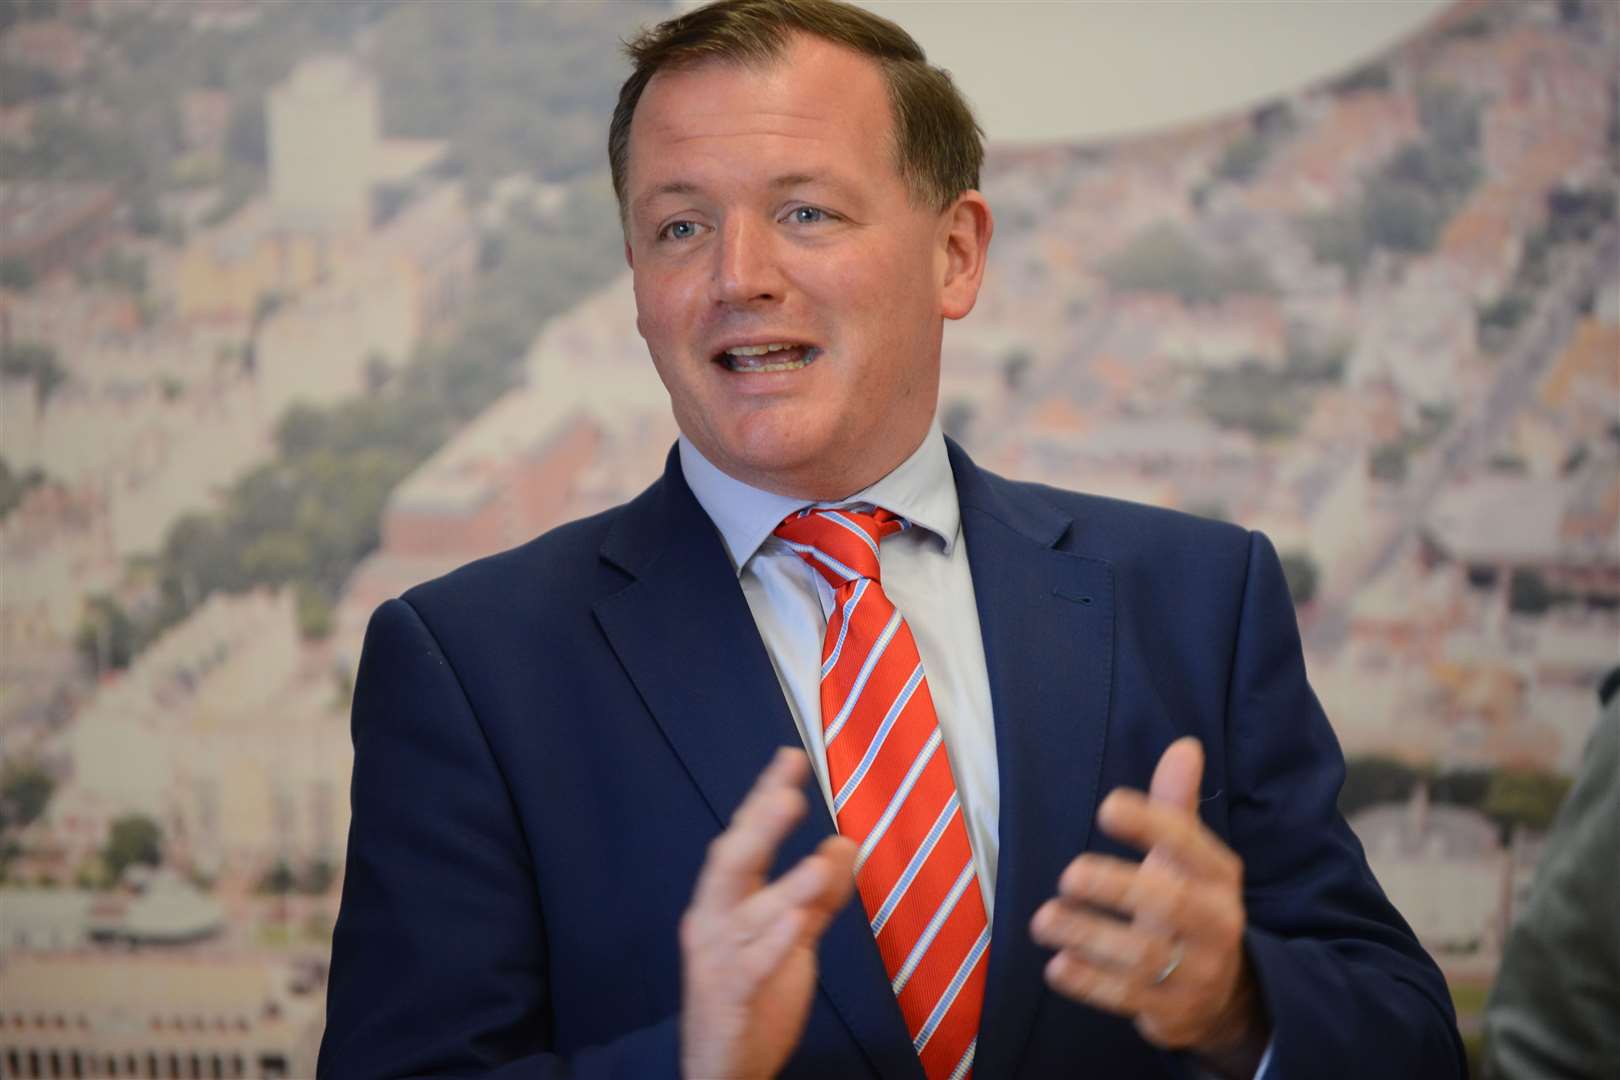 MP Damian Collins. Picture: Gary Browne